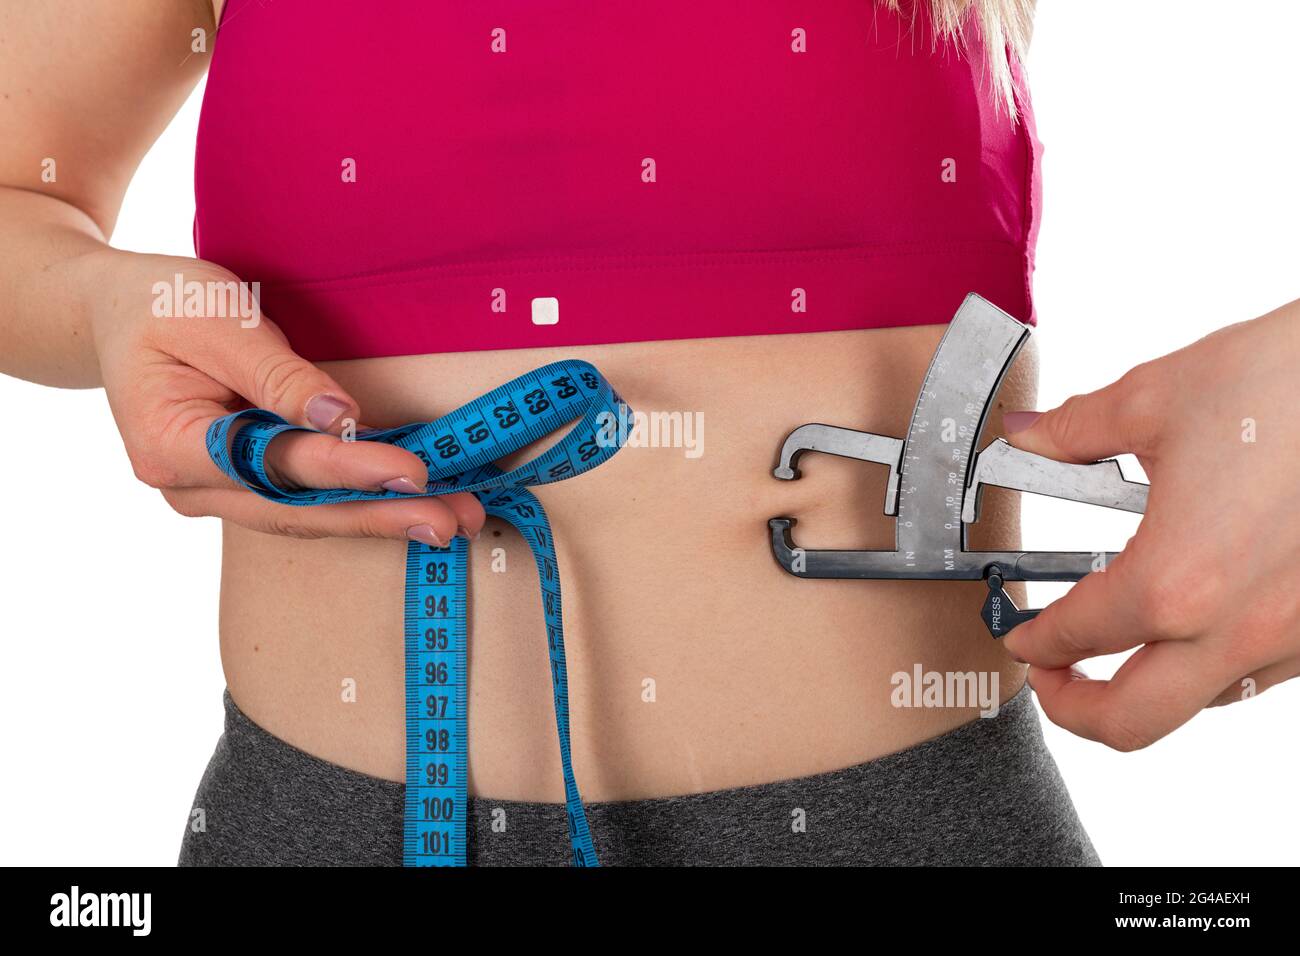 Man is Measuring His Body Fat with Calipers. Stock Photo - Image of  exercise, holding: 69566936